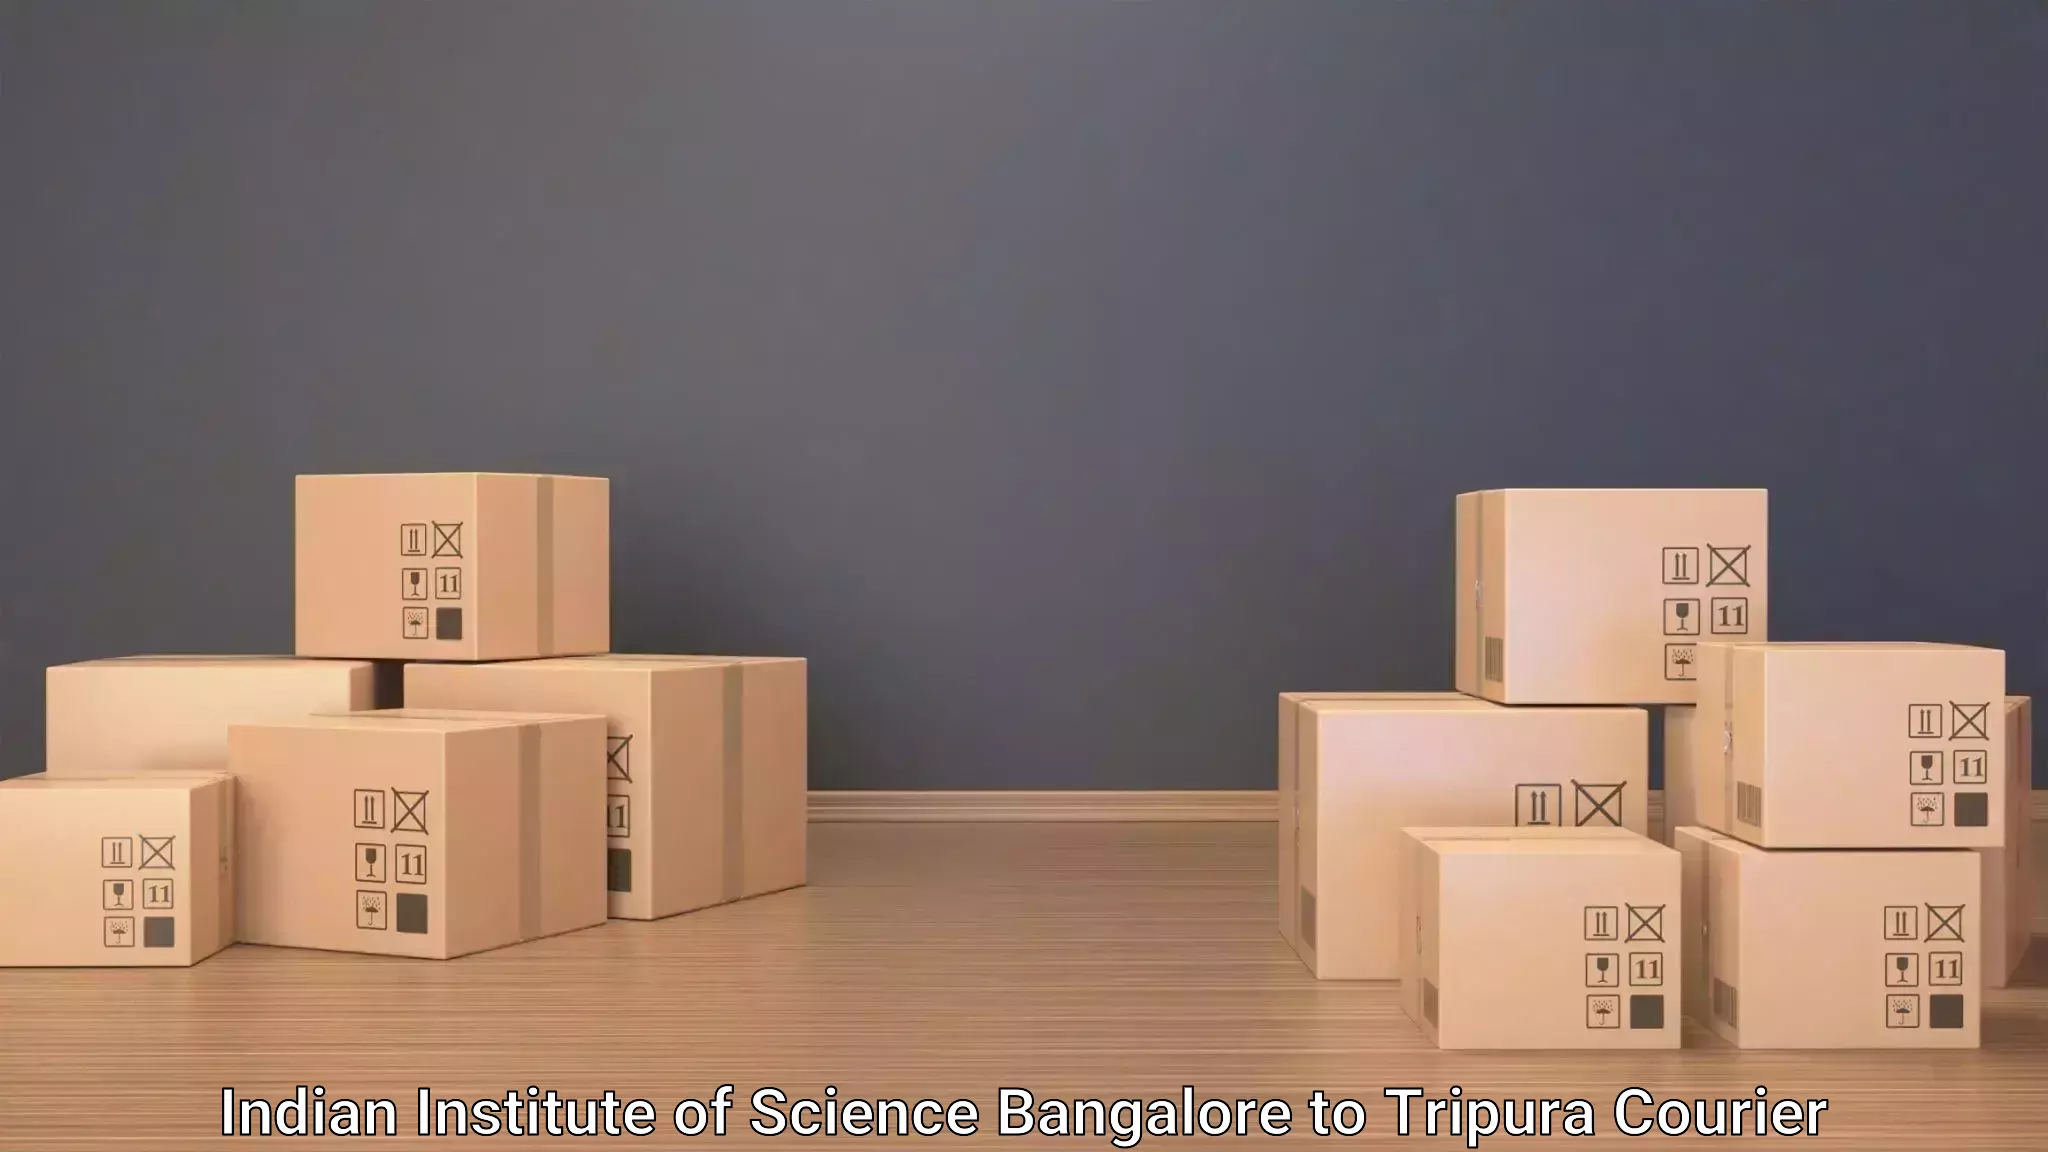 Same day luggage service in Indian Institute of Science Bangalore to Tripura